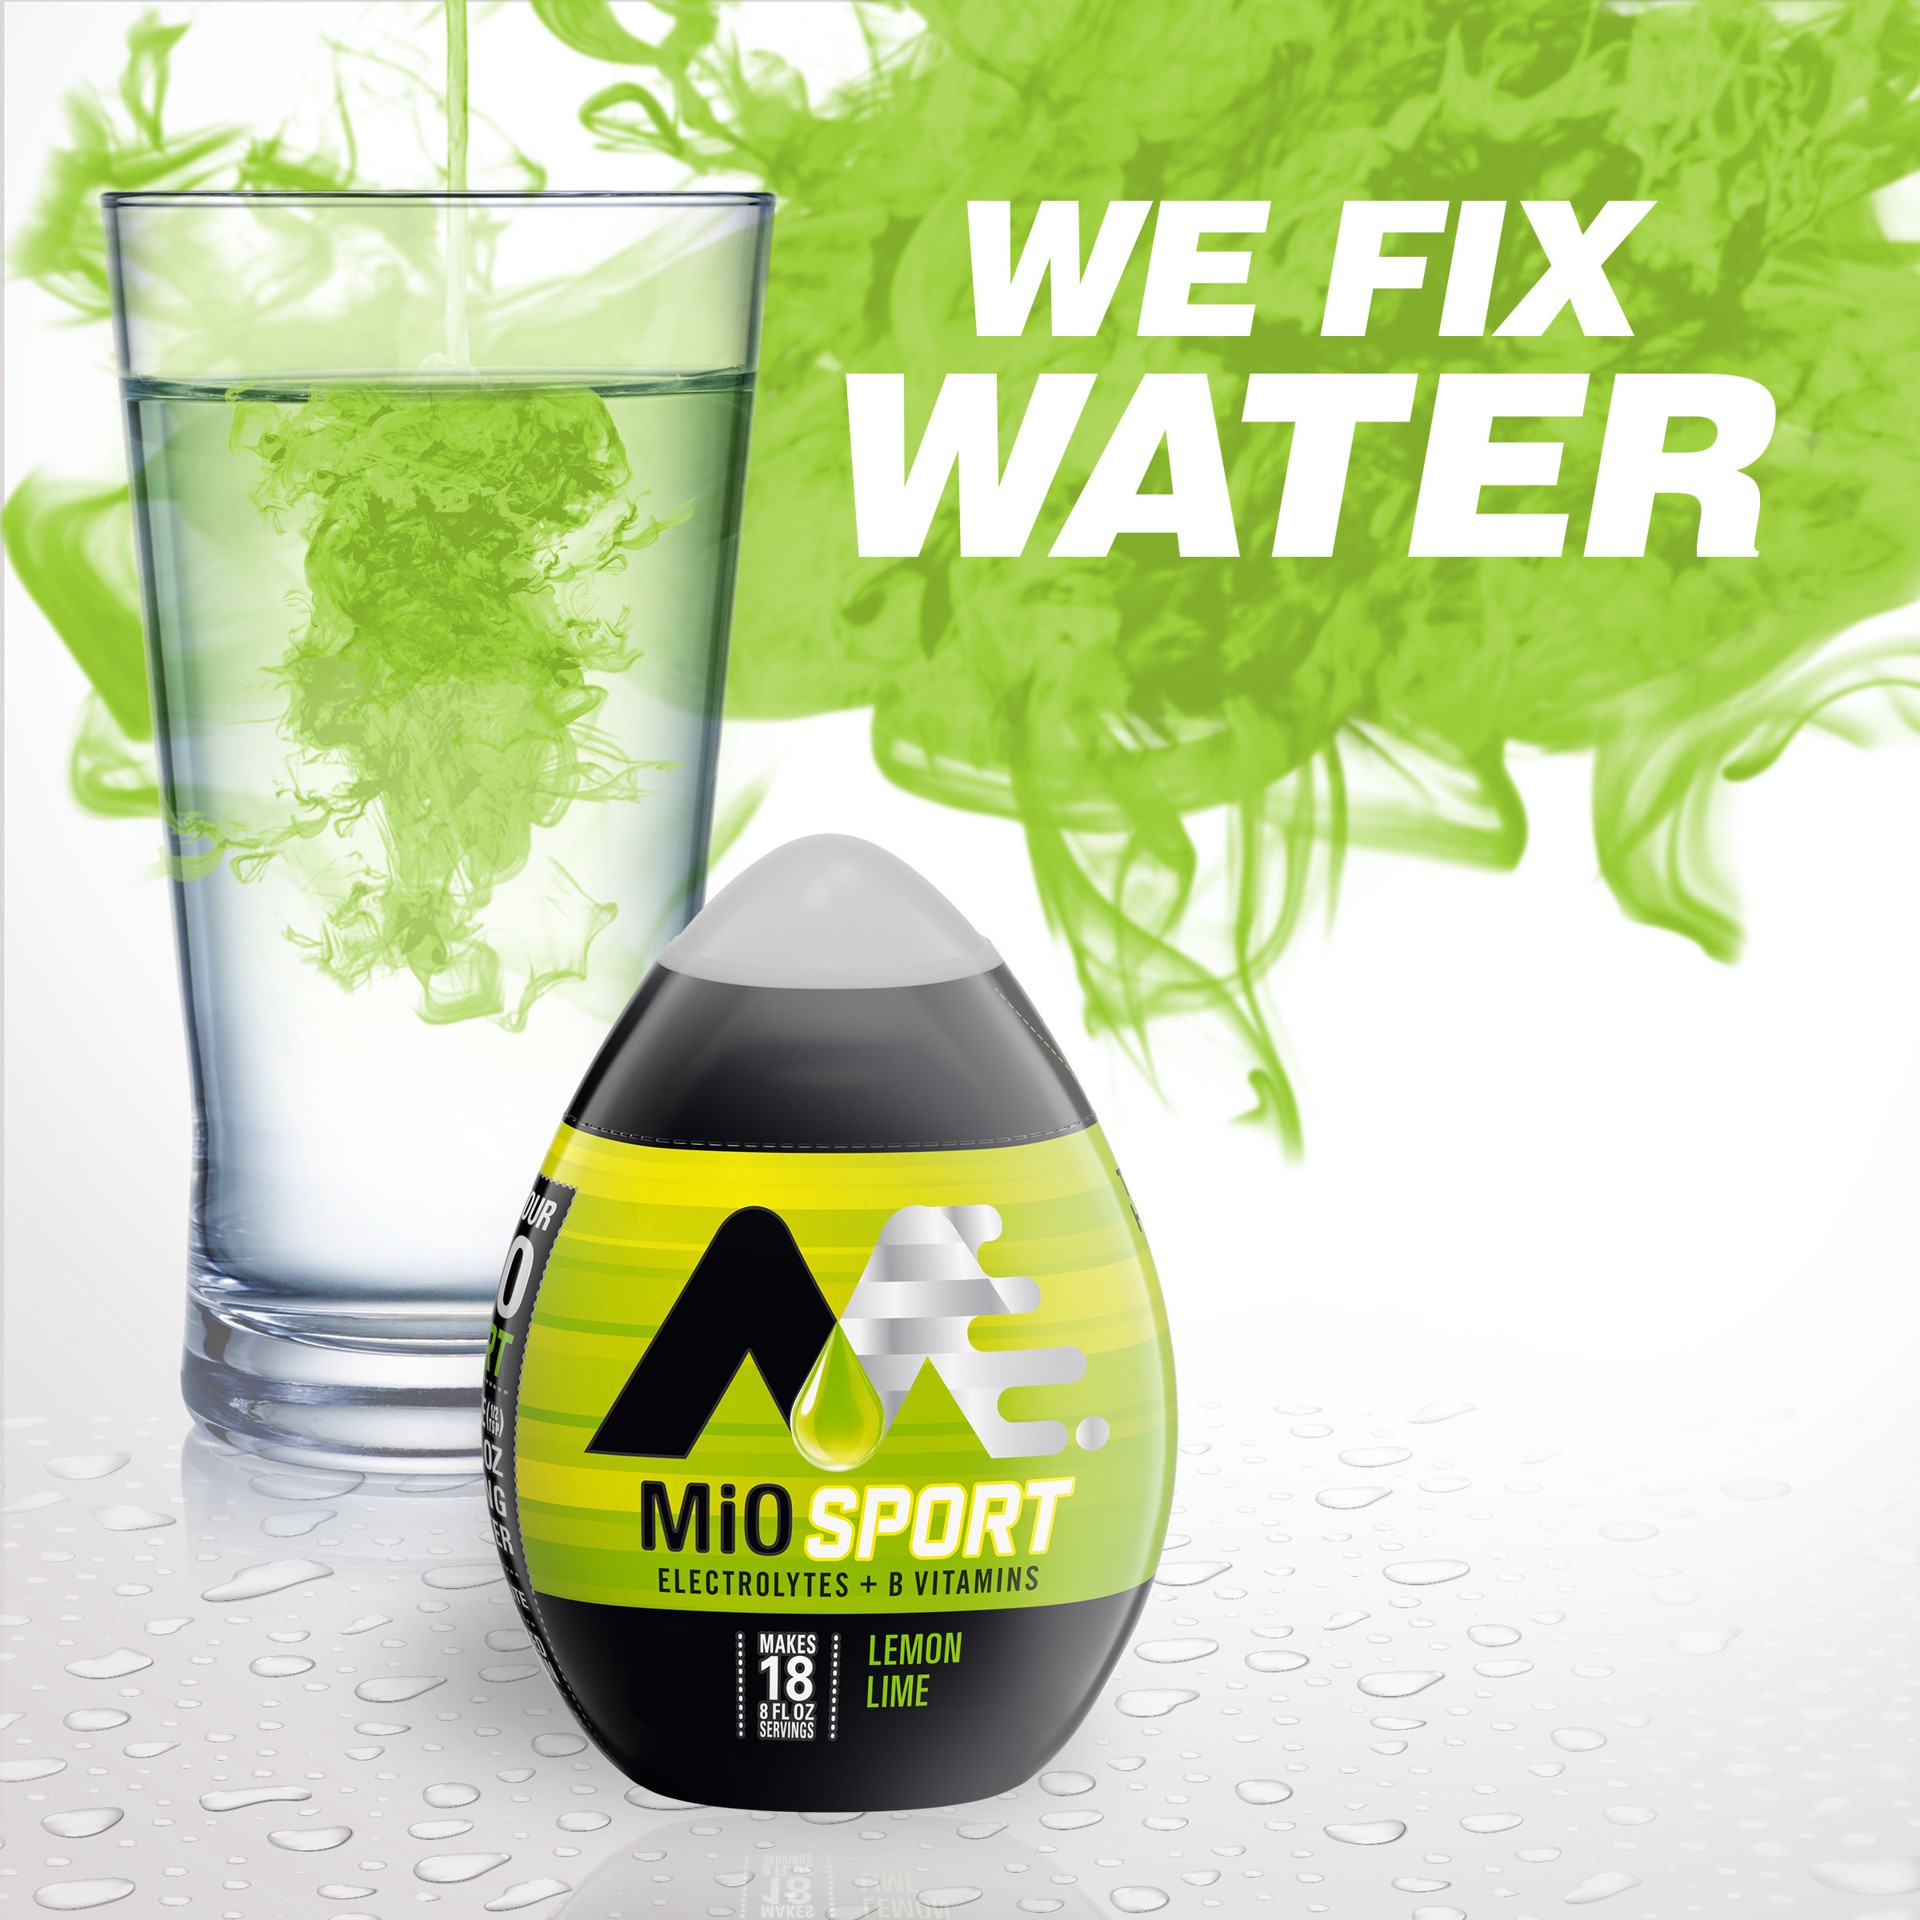 MiO Sport Lemon Lime Naturally Flavored Liquid Water Enhancer with Electrolytes and B Vitamins Bottle 1.62 fl oz Shipt